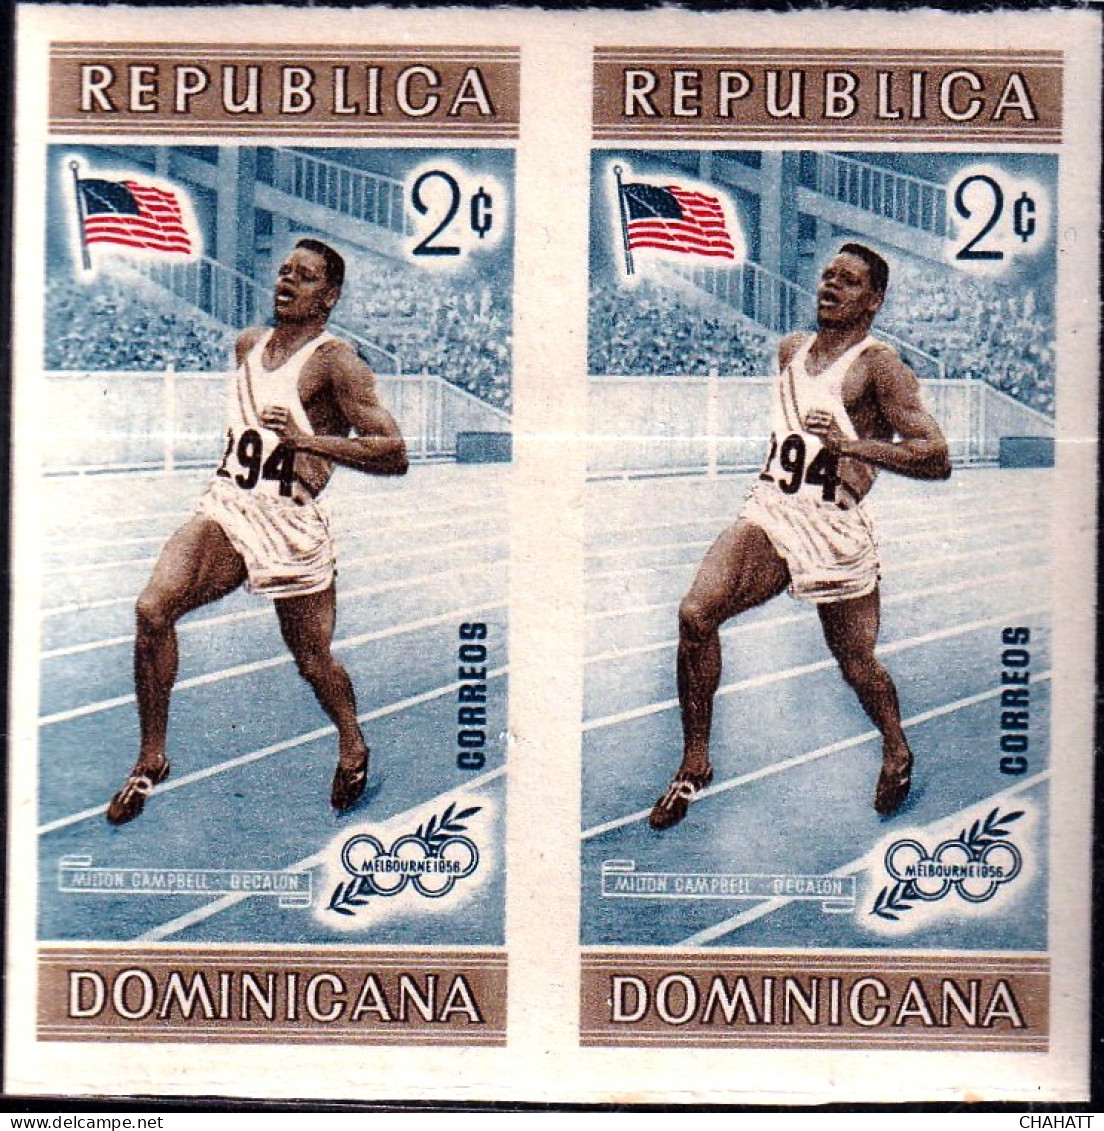 OLYMPICS-1956, MELBOURNE- DECALON (ATHLETICS) IMPERF PAIR-COLOR VARIETY- DOMINICANA-MNH- SCARCE- A5-745 - Summer 1956: Melbourne